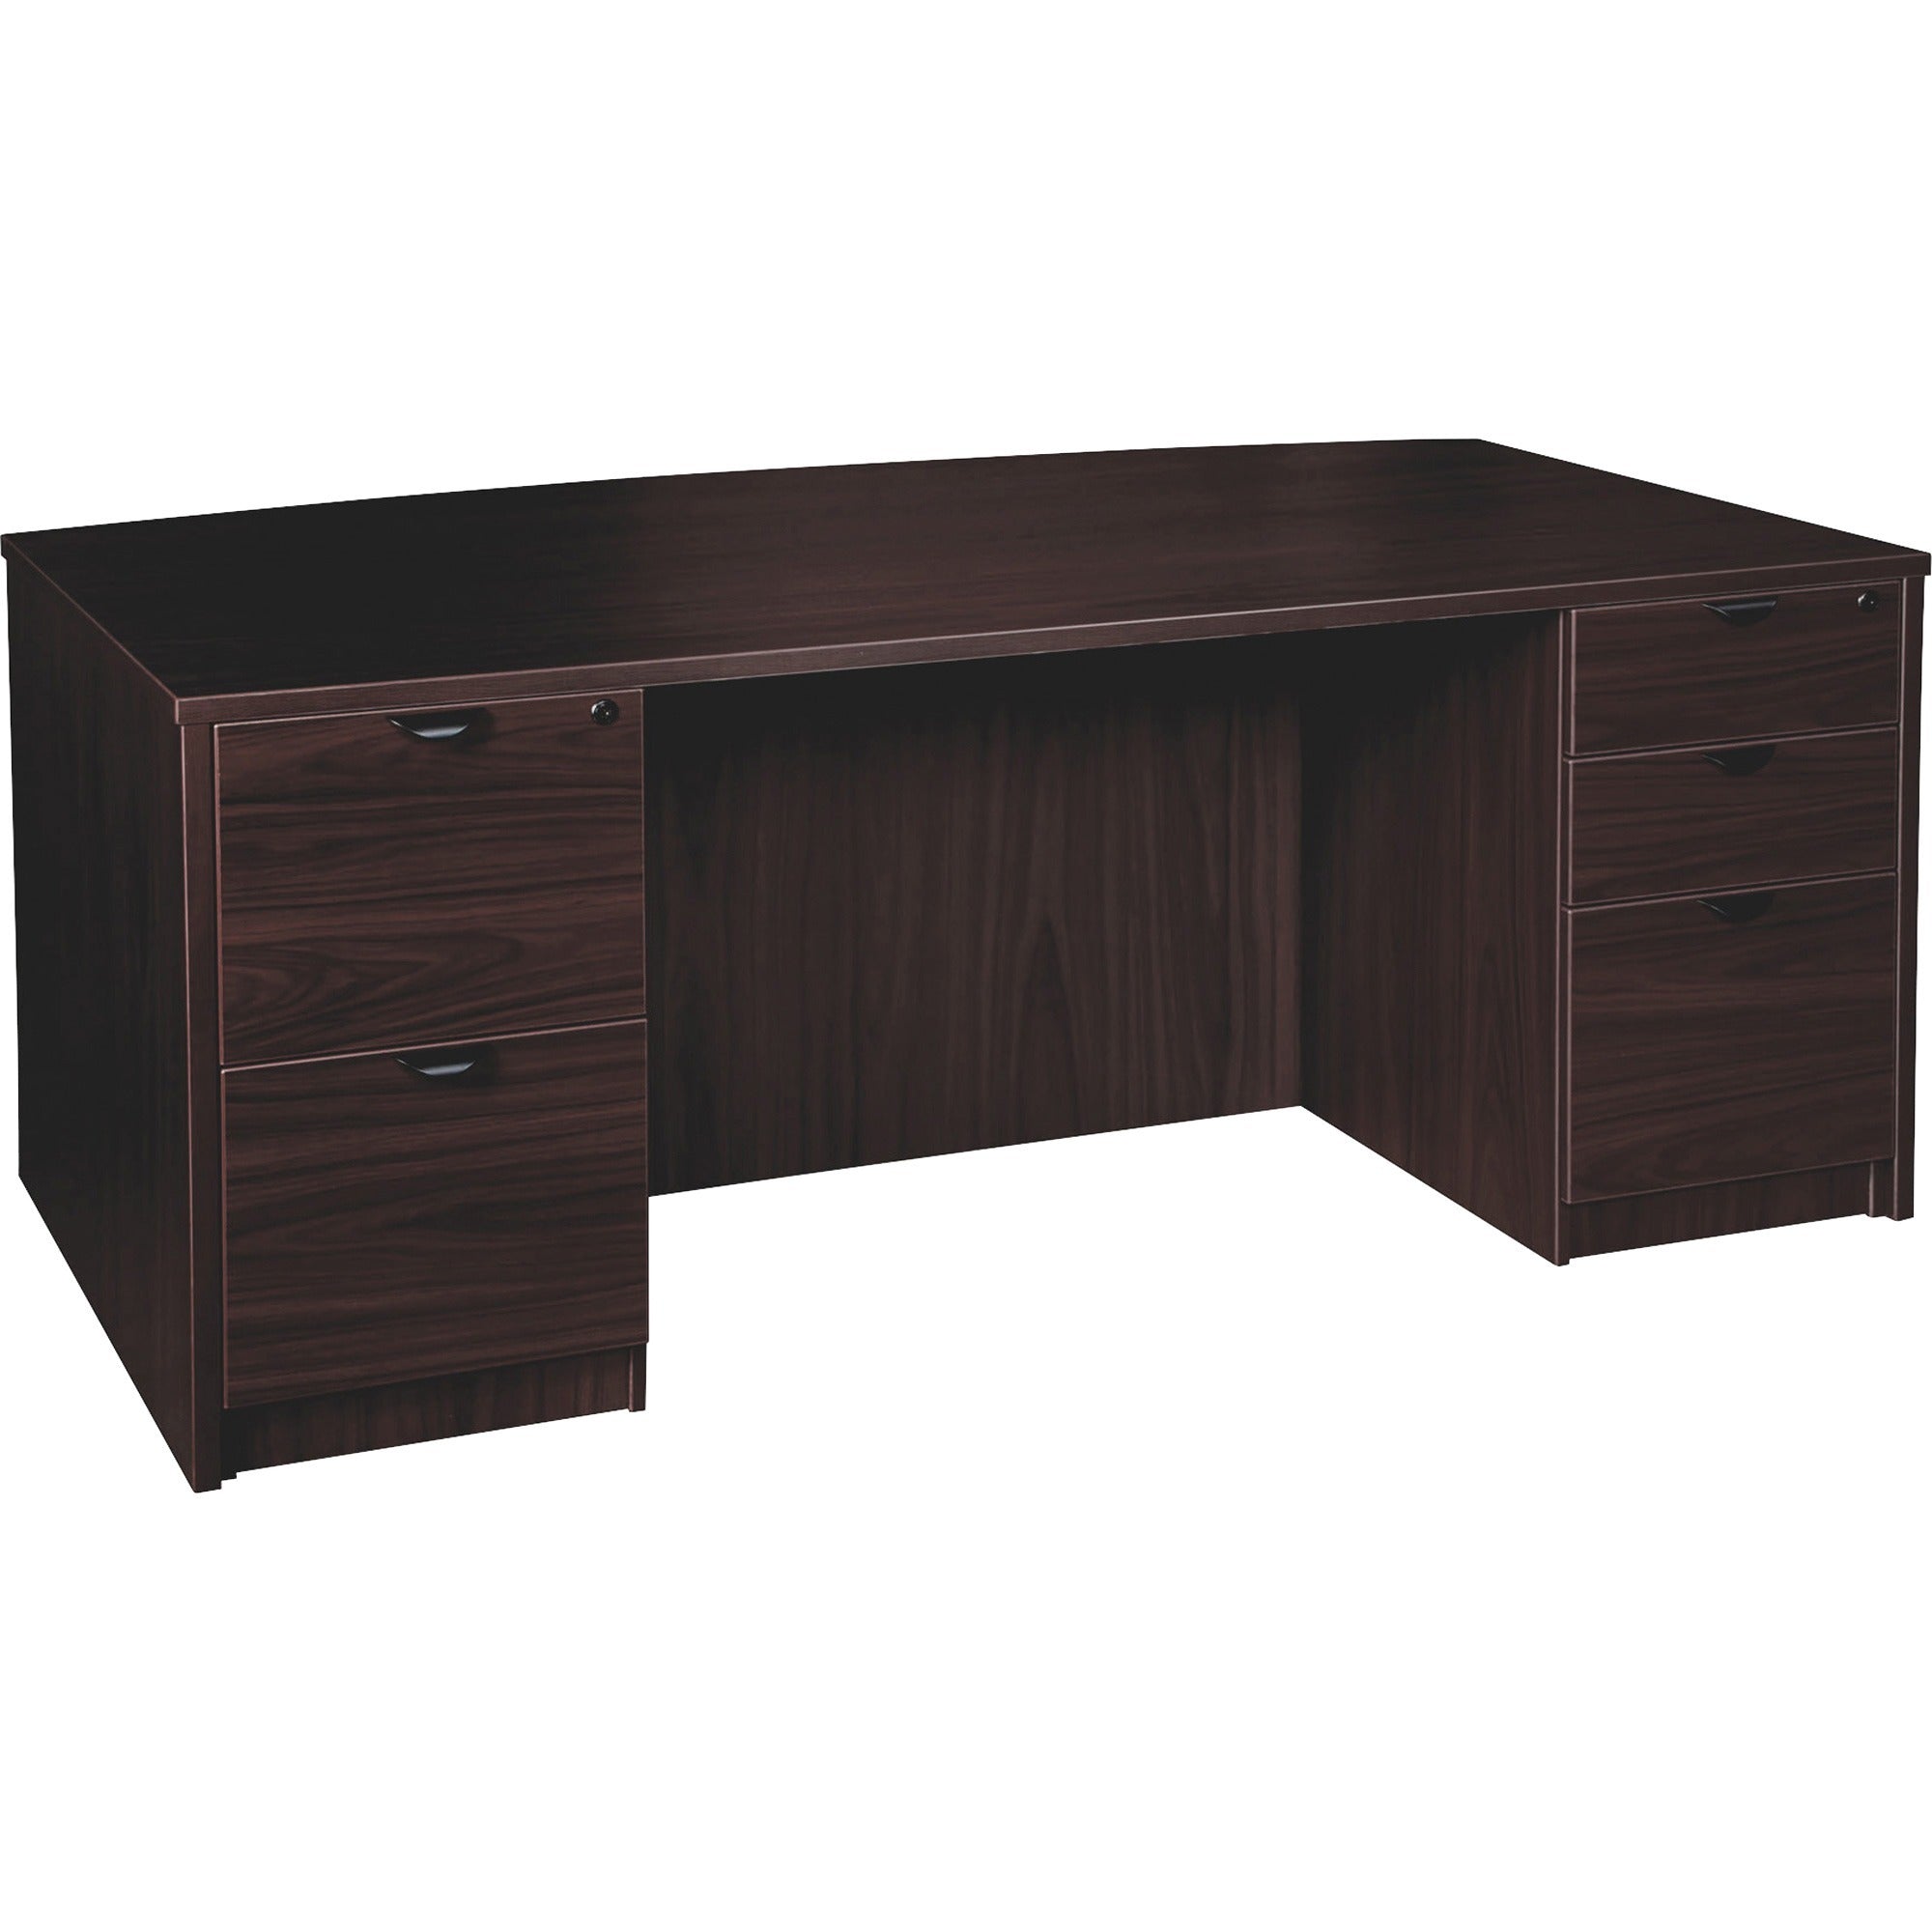 lorell-prominence-20-bowfront-double-pedestal-desk-1-top-72-x-4229-5-x-file-box-drawers-double-pedestal-band-edge-material-particleboard-finish-espresso-laminate-thermofused-melamine-tfm_llrpd4272dpes - 1